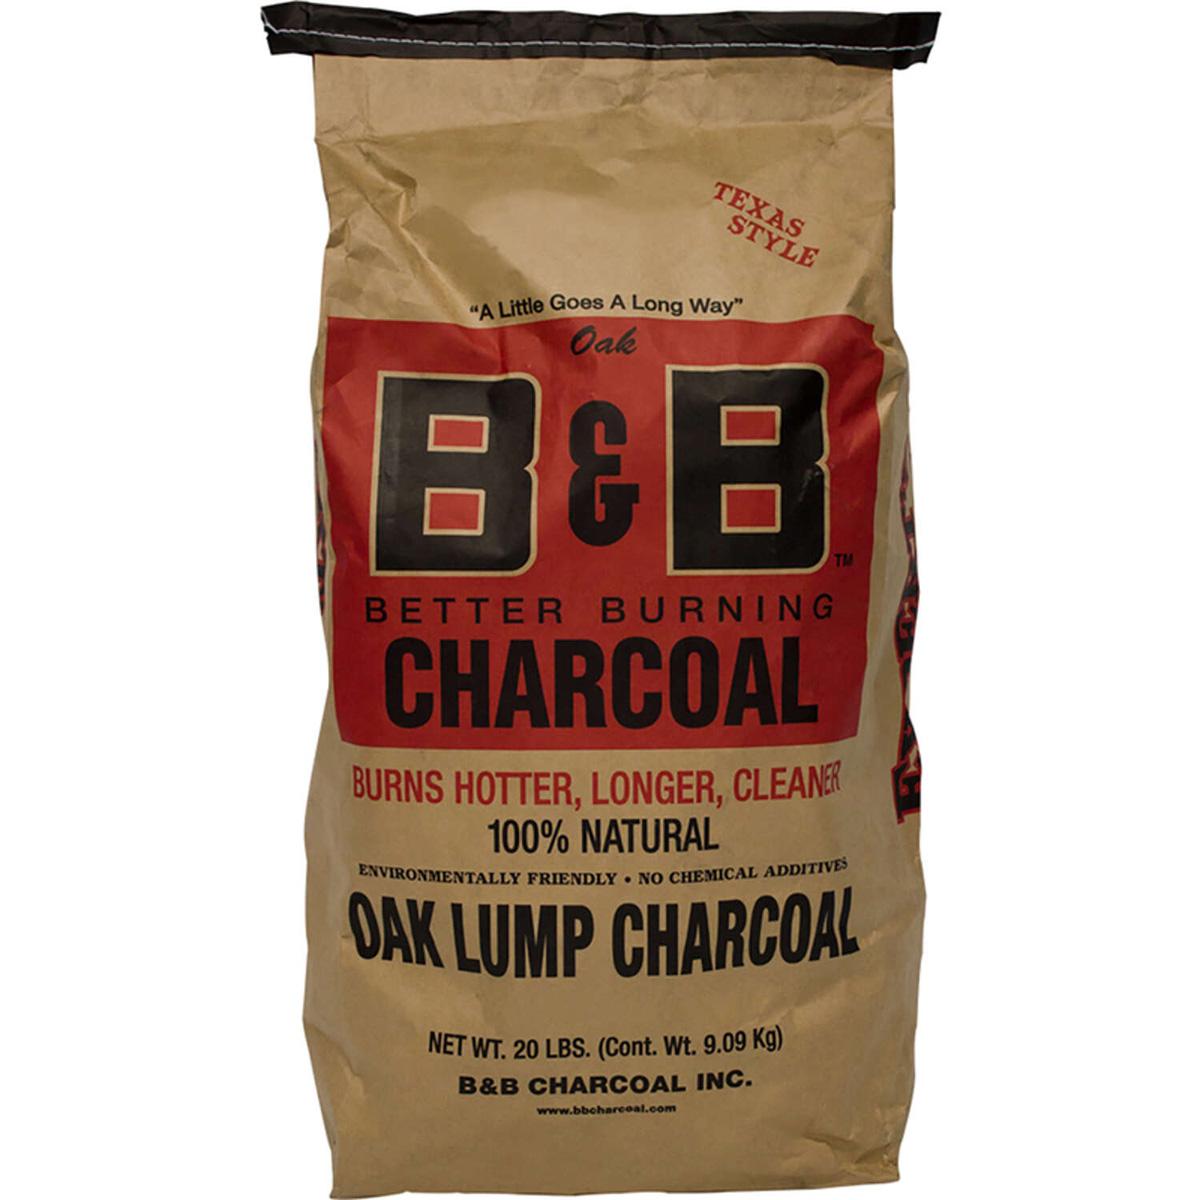 BB Charcoal All Natural Lump Charcoal for $13.99